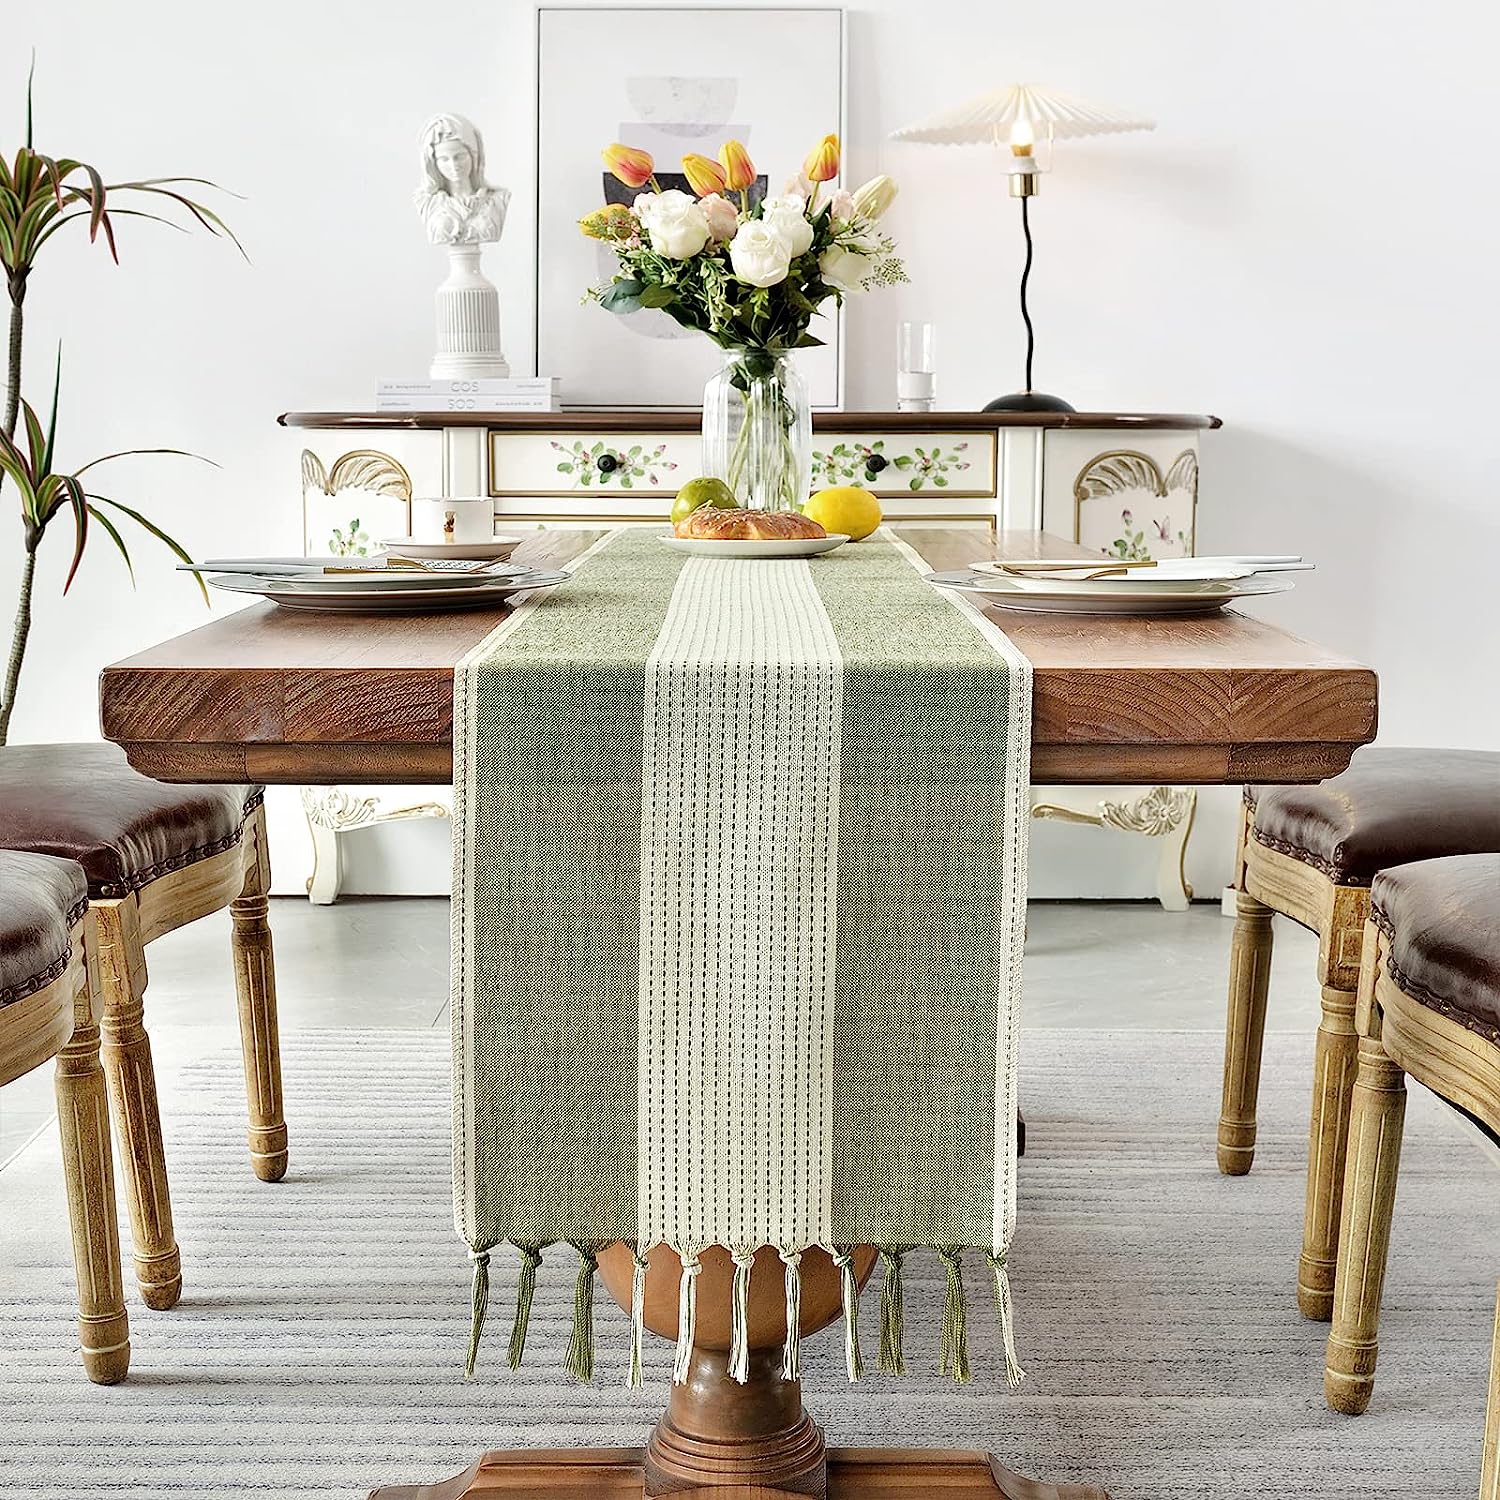 Wracra Cotton Linen Sage Green Table Runner 180cm Long with Hand-tassels, Macrame Table Runner for Holiday Parties and Everyday Use(Sage Green, 180cm) 4